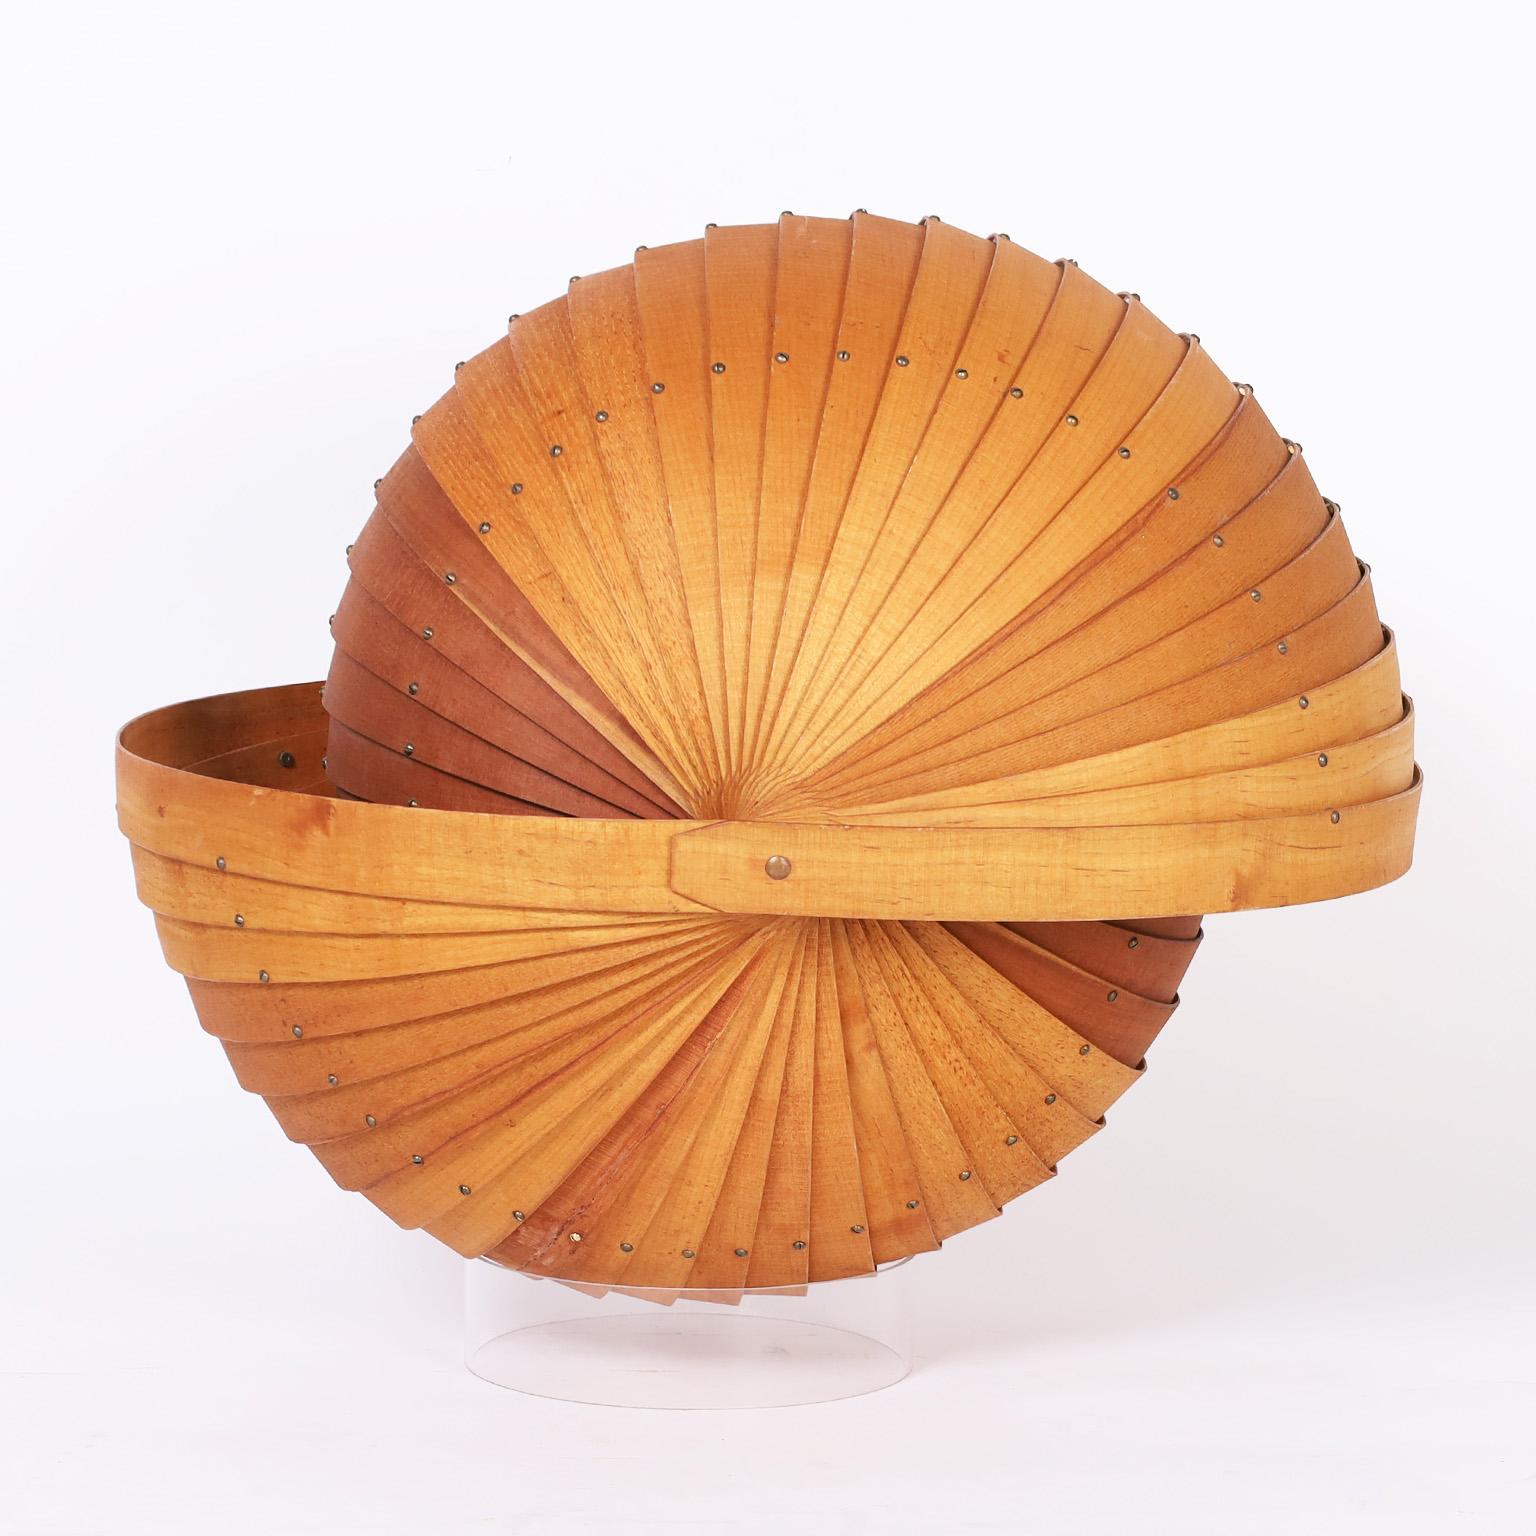 Mid century sculpture crafted in oak and ash woods with striking precision creating a mind blowing double sided nautilus seashell. Presented on a lucite base.